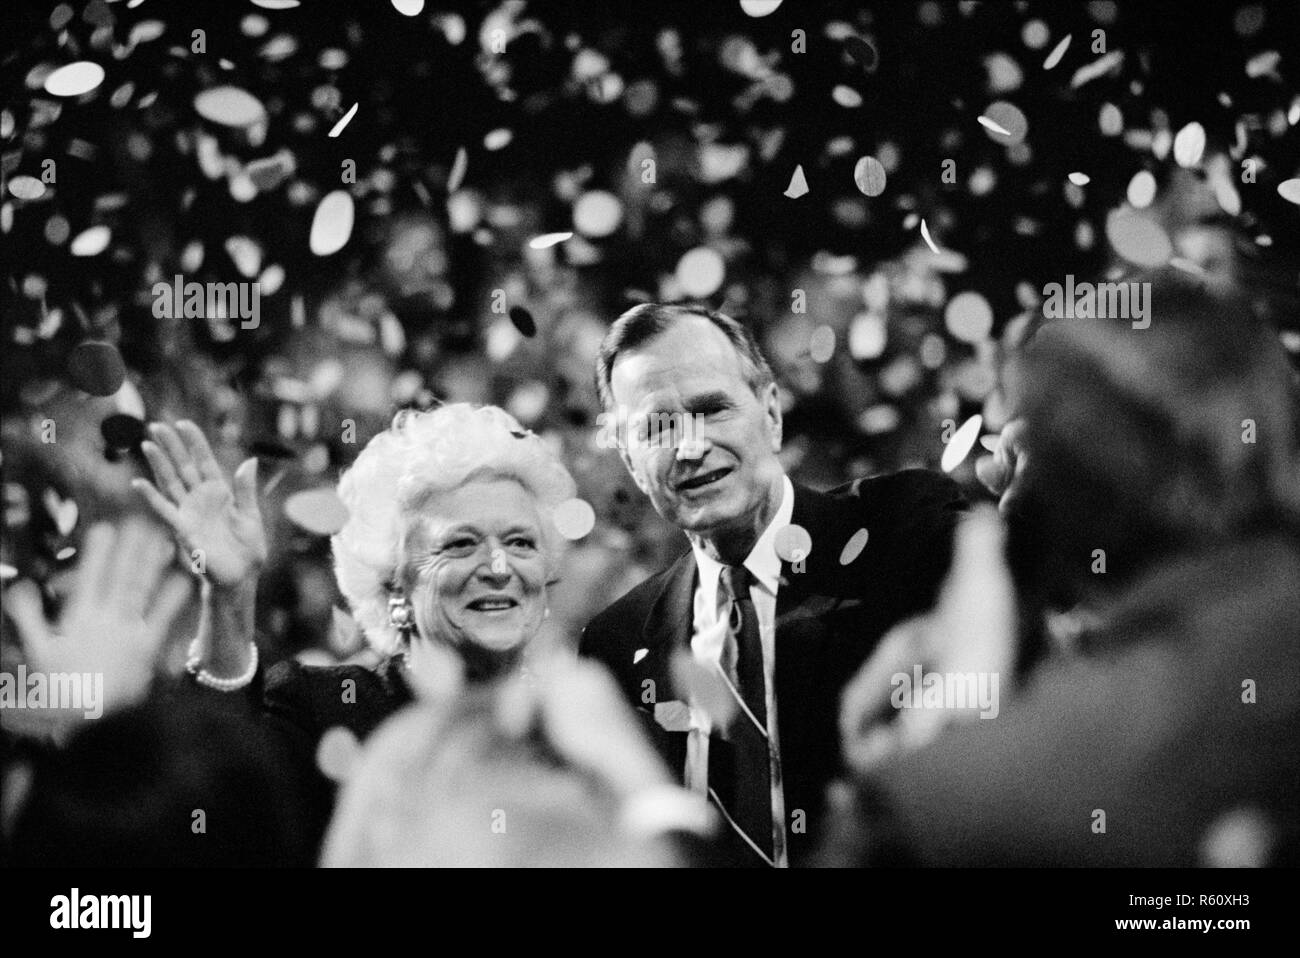 Presidential nominee George H.W. Bush and wife Barbara Bush wave to crowd at the 1992 Republican National Convention in Houston, Texas. Stock Photo